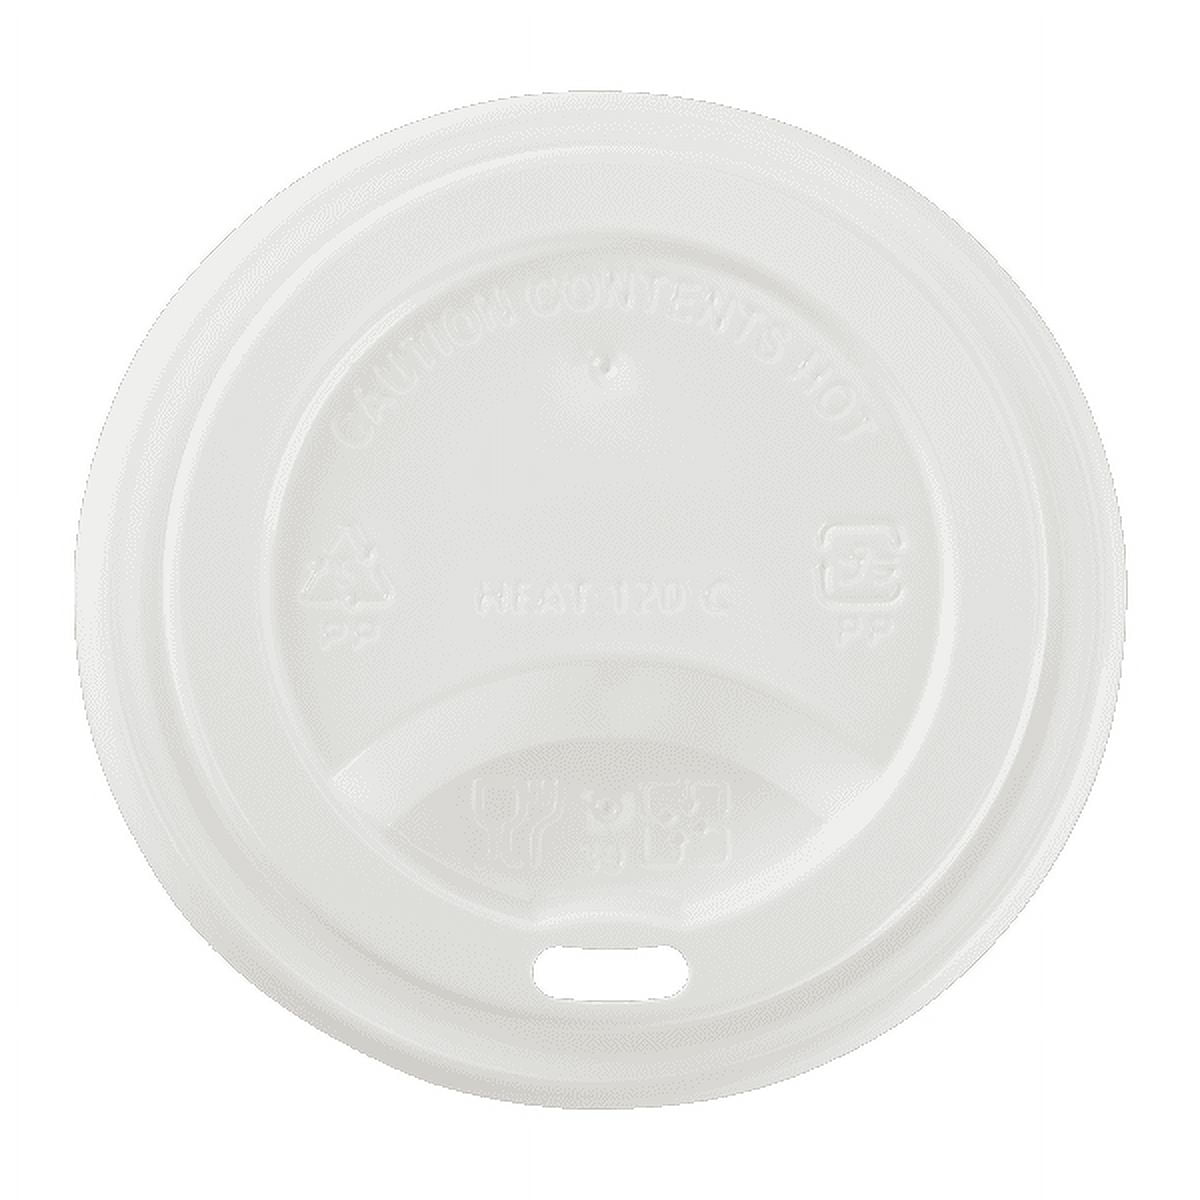 Coppetta Round White Paper To Go Cup Lid - Fits 5 oz - 3 1/2 x 3 1